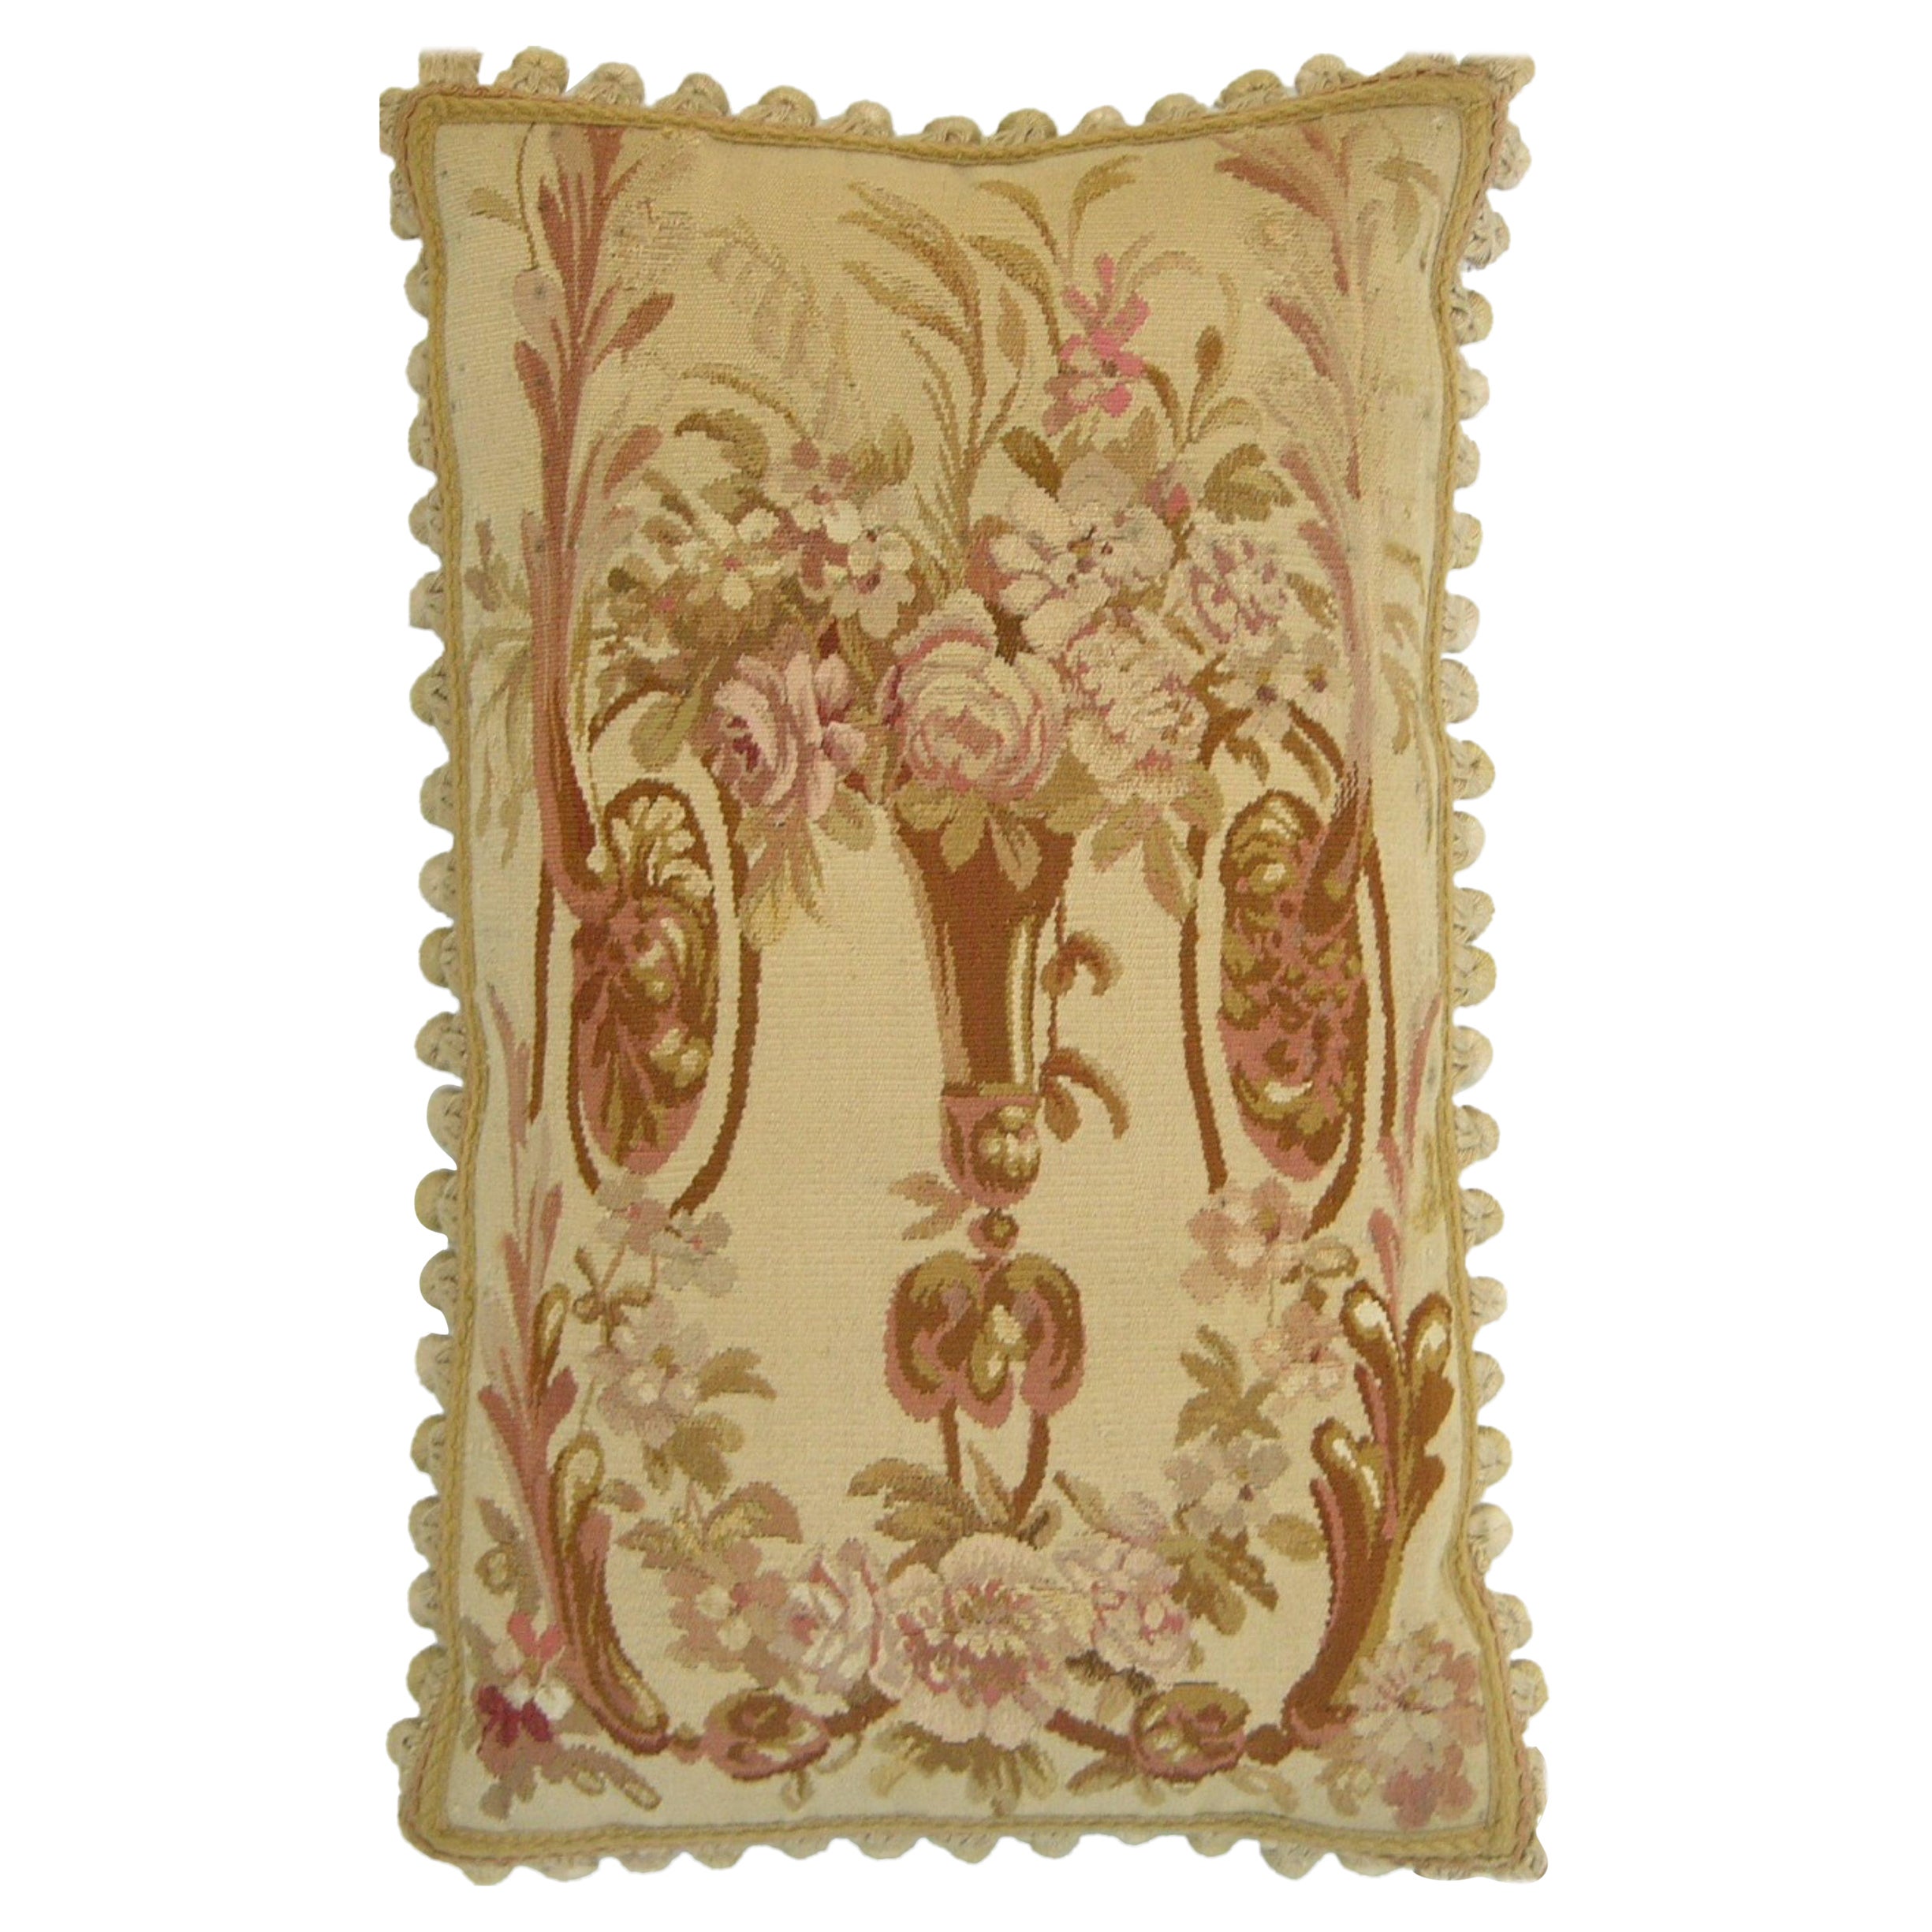 Circa 1870 Antique French Aubusson Tapestry Pillow